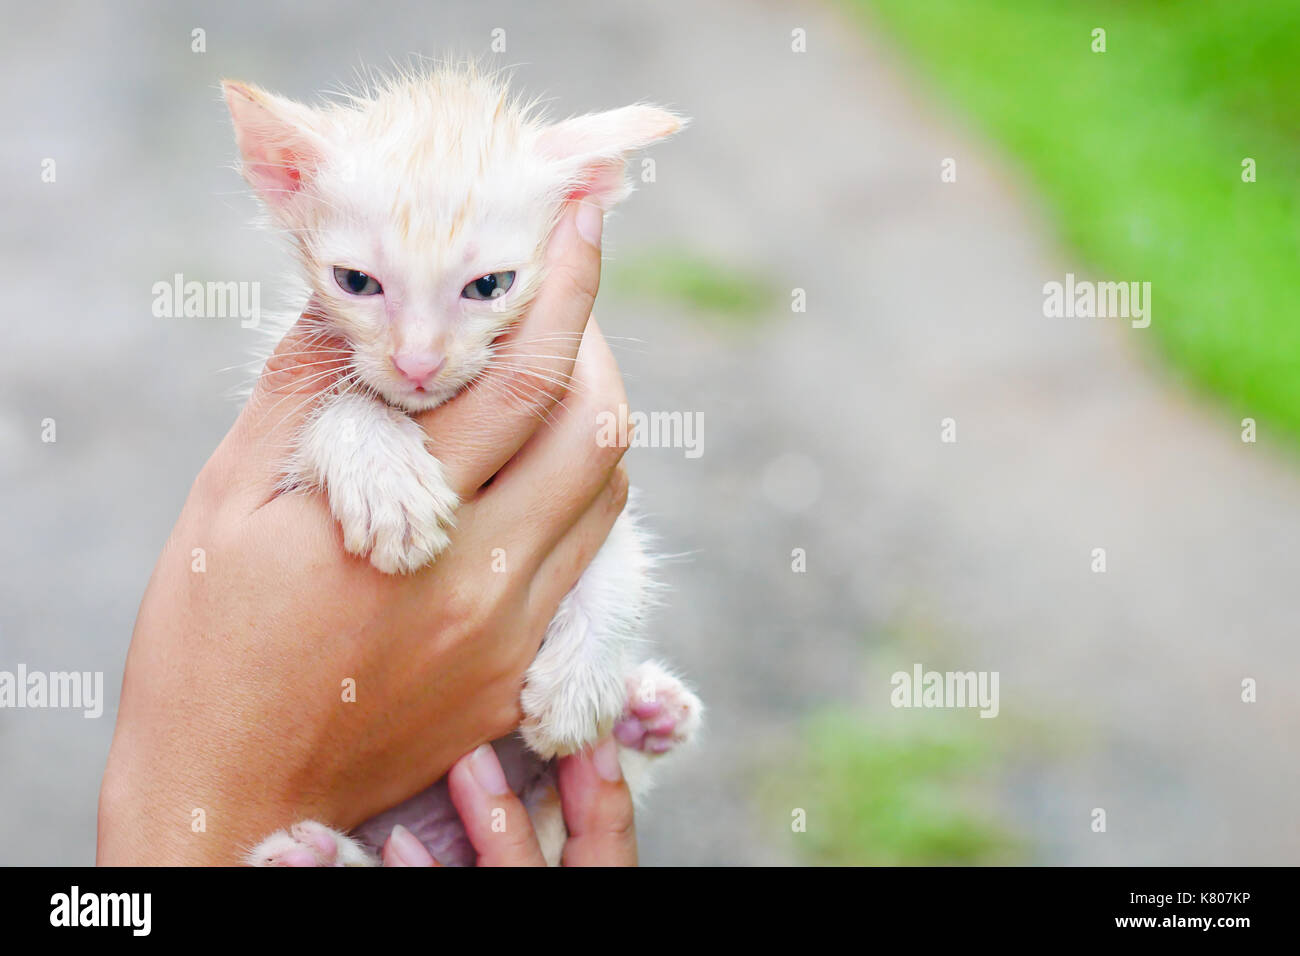 Owner holding cute little kitten at home after Bath Cat Stock Photo